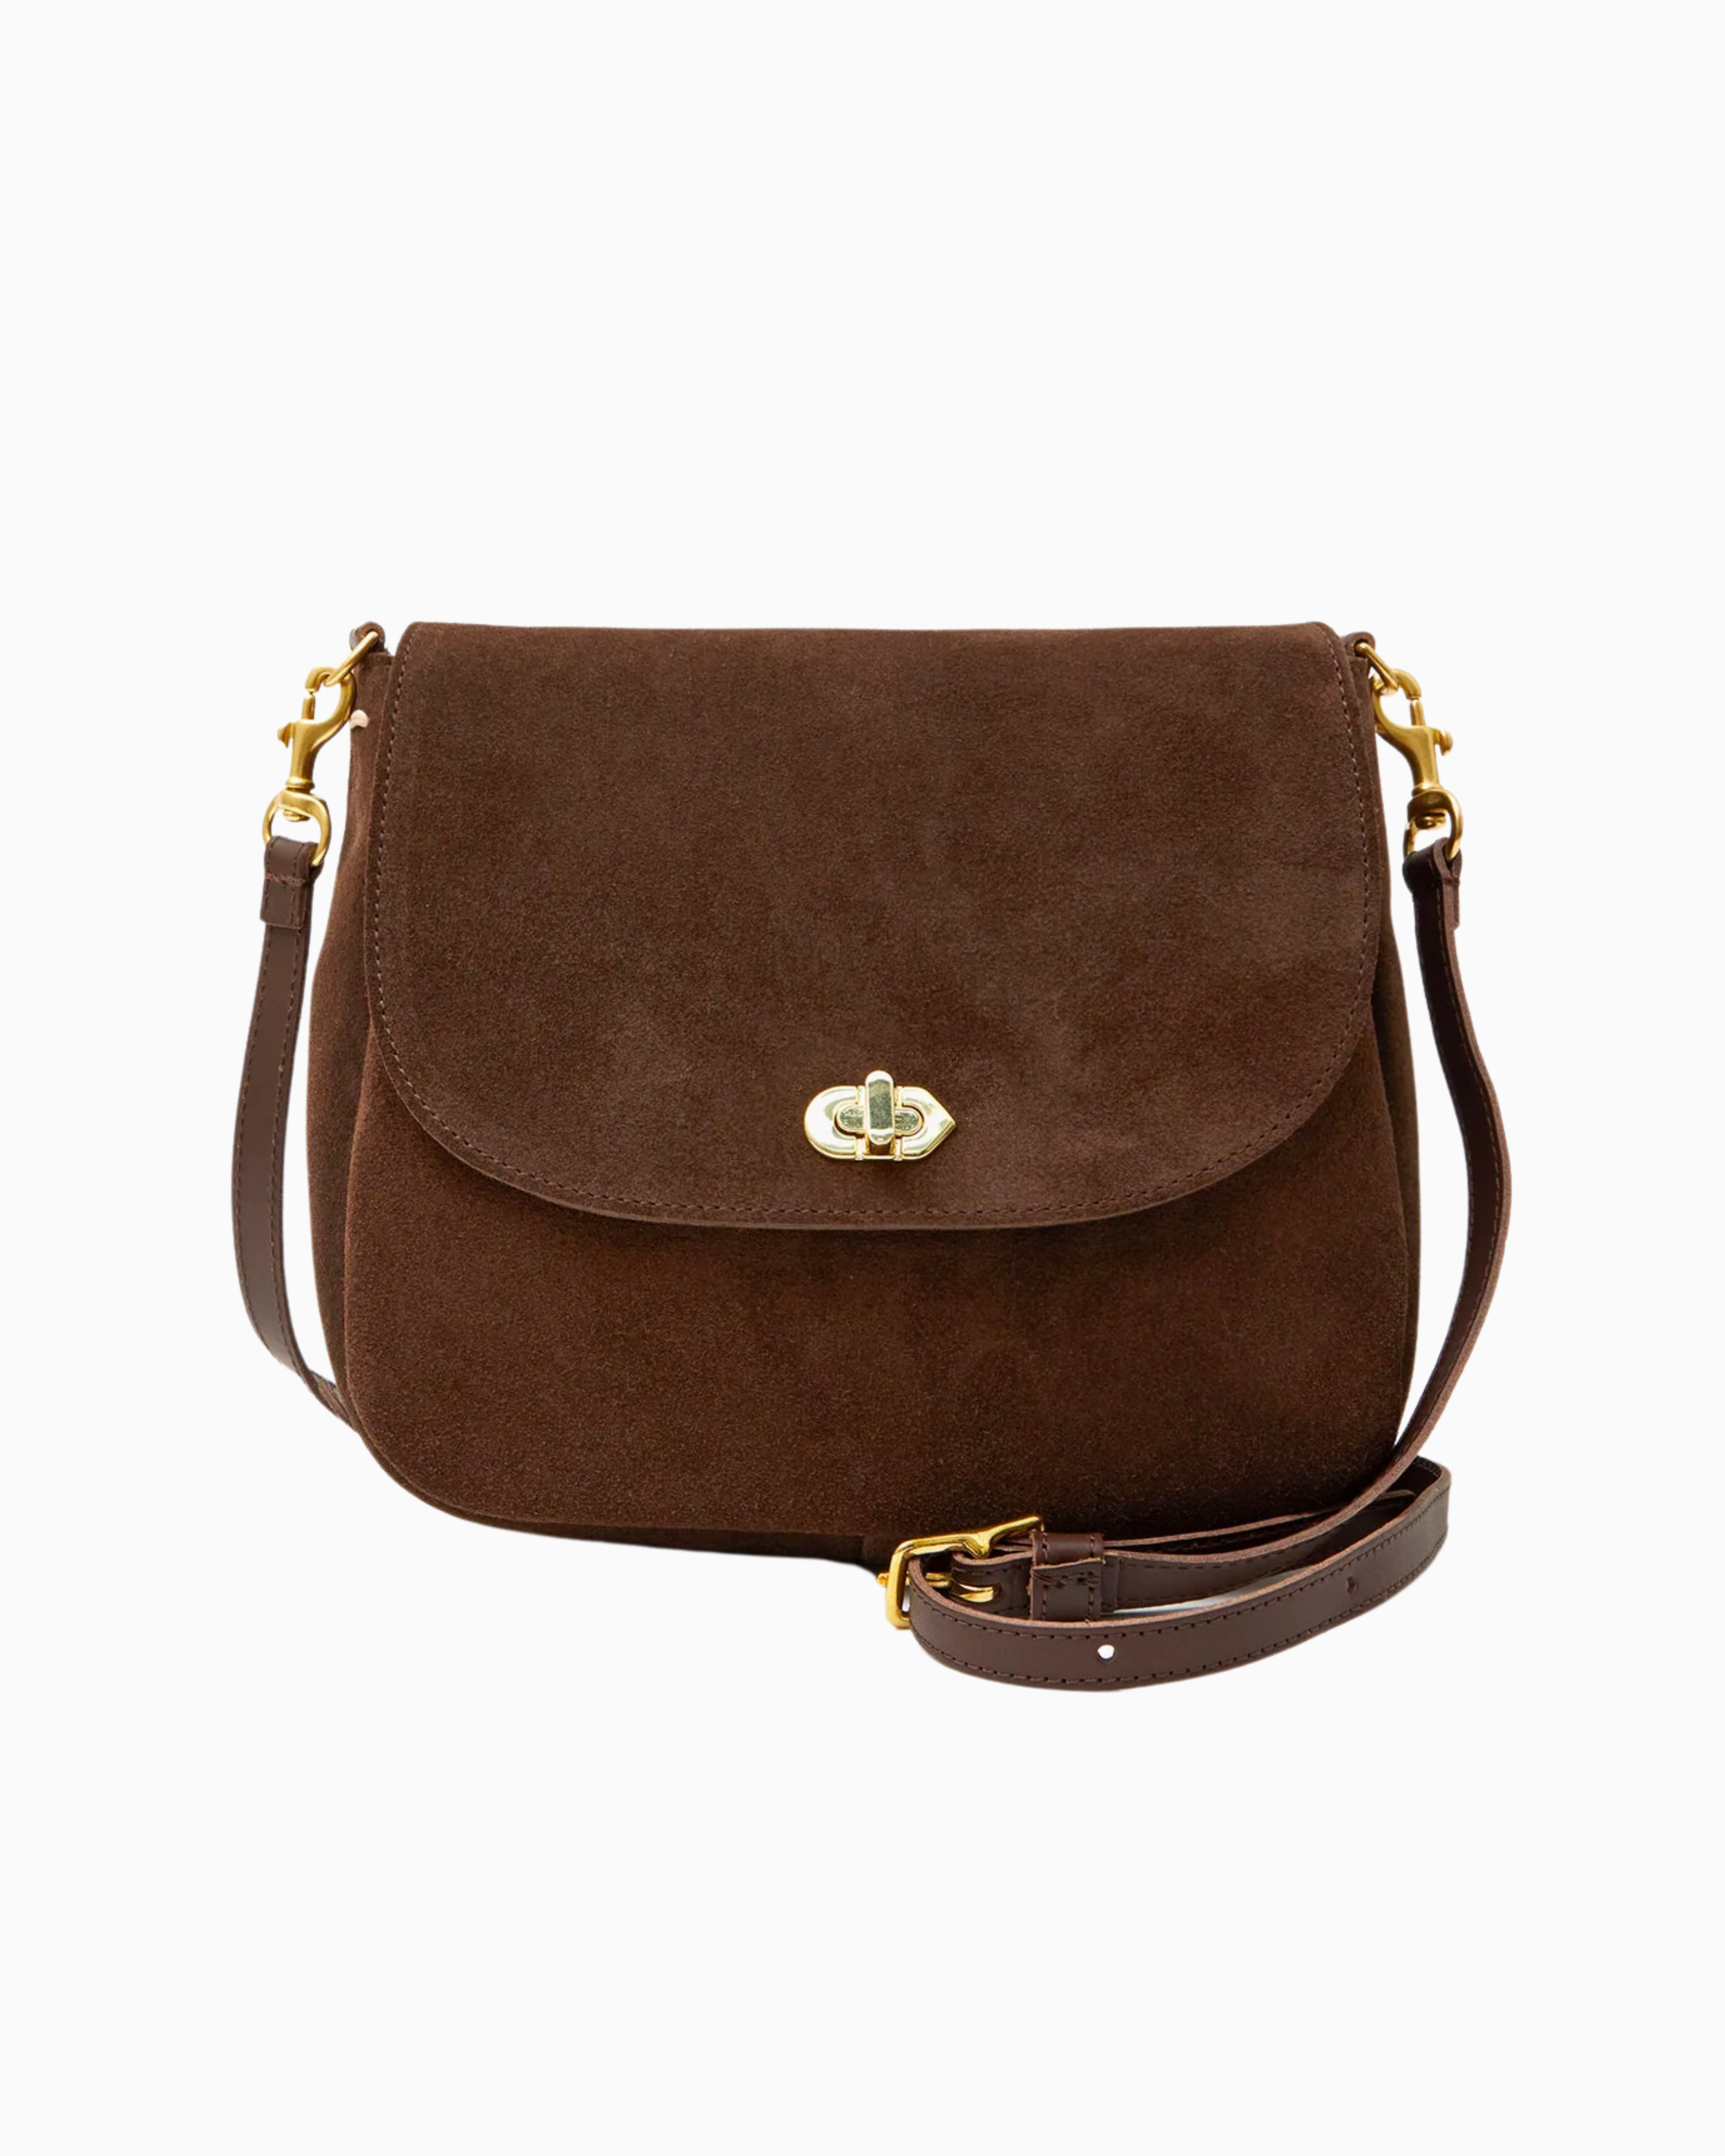 Clare V Turnlock Louis Bag in Chocolate Suede